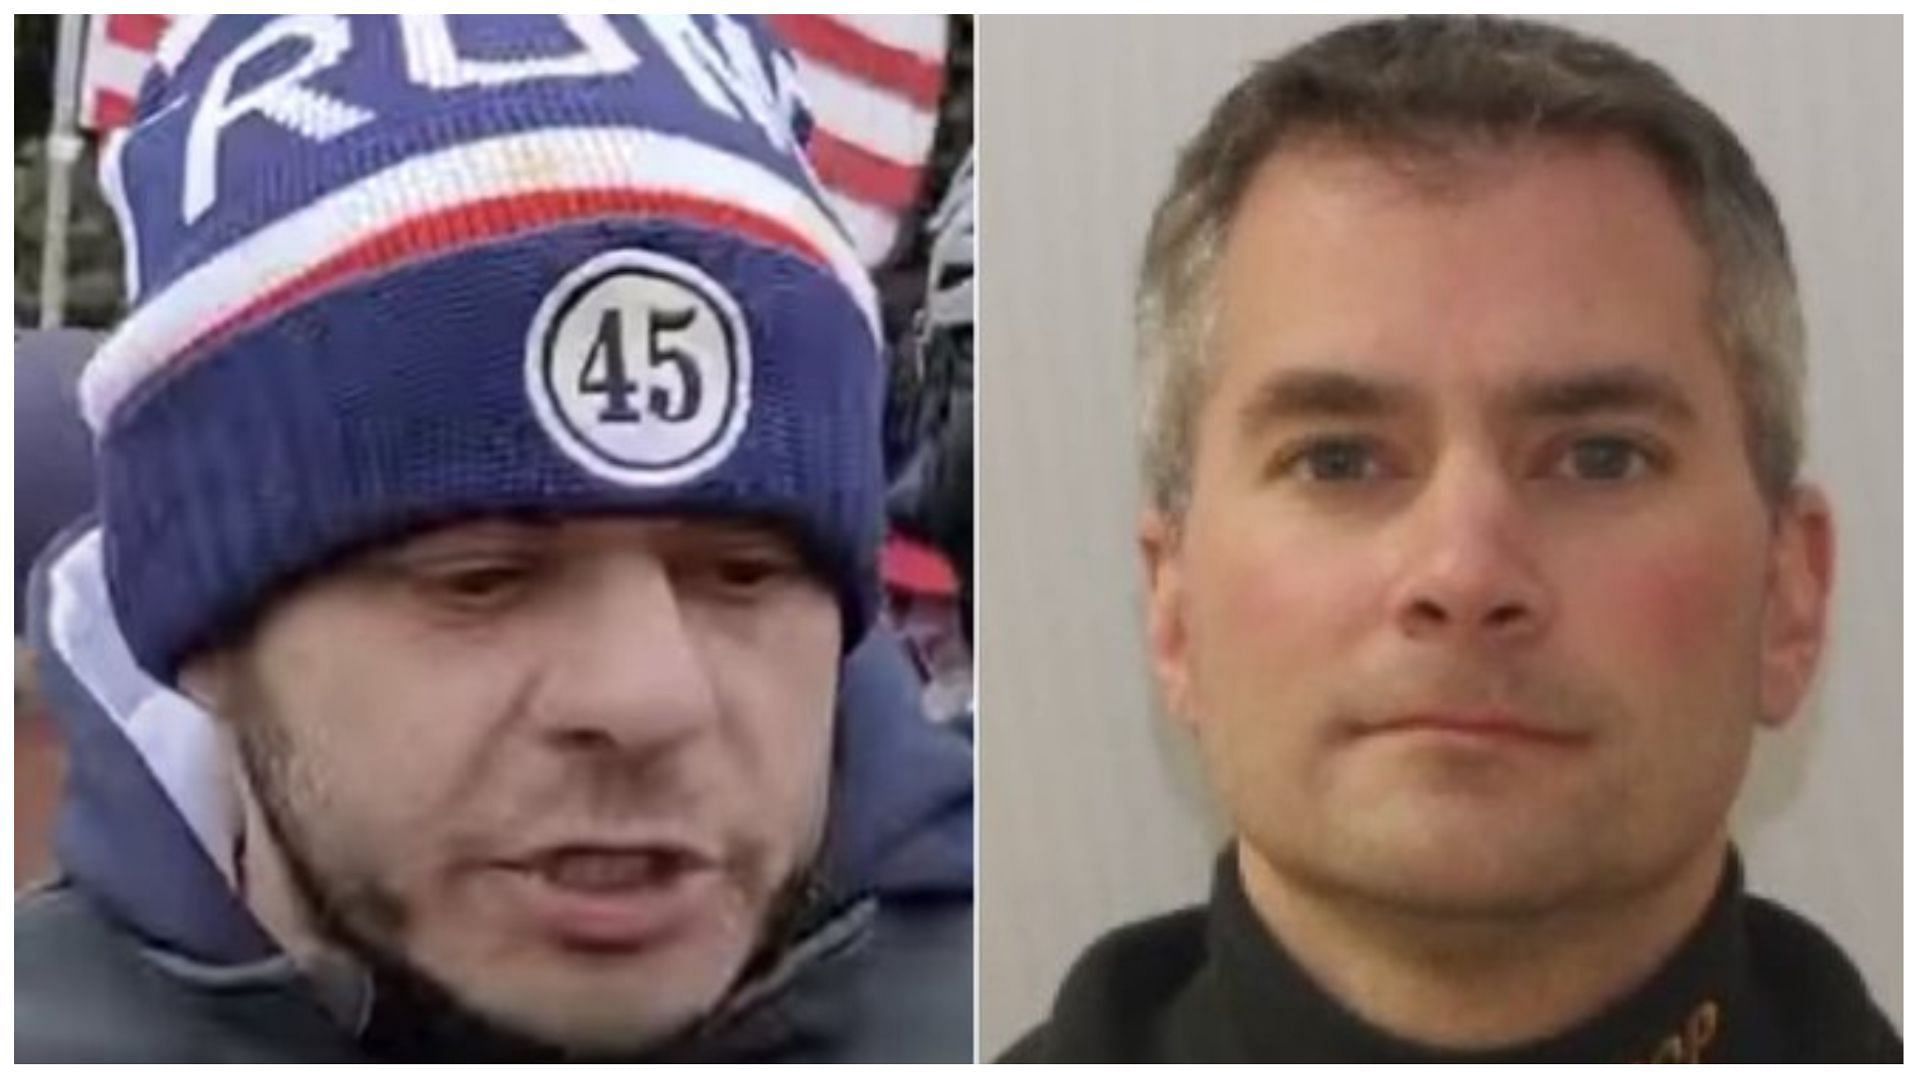 Julian Khater (left) assaulted several police officers including Brian Sicknick (right) in the 2021 attack on the US Capitol Building, (Image via @JordanOnRecord/Twitter)